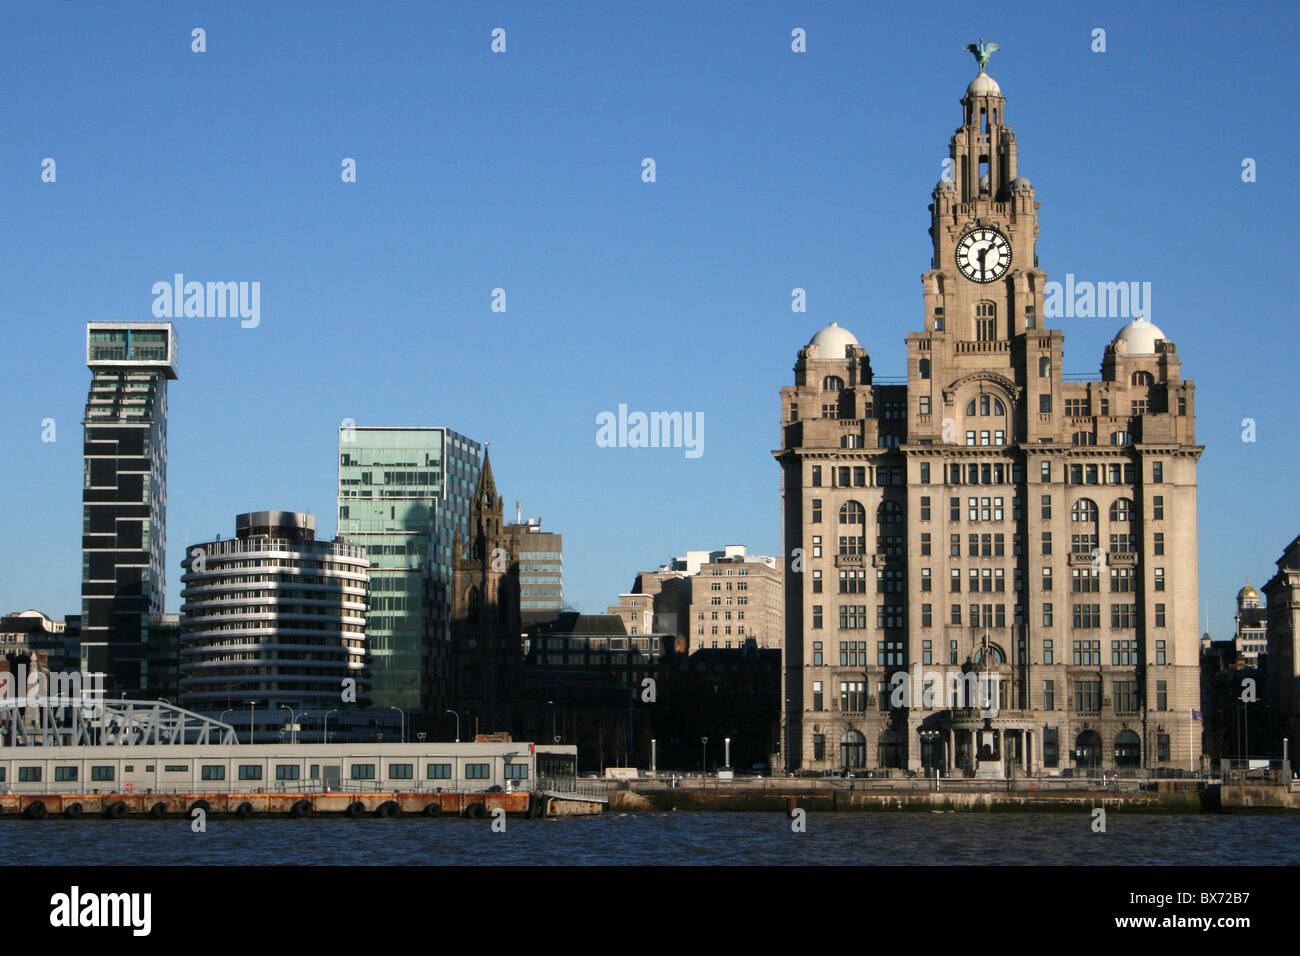 Liverpool Skyline As Seen From The River Mersey, UK Stock Photo